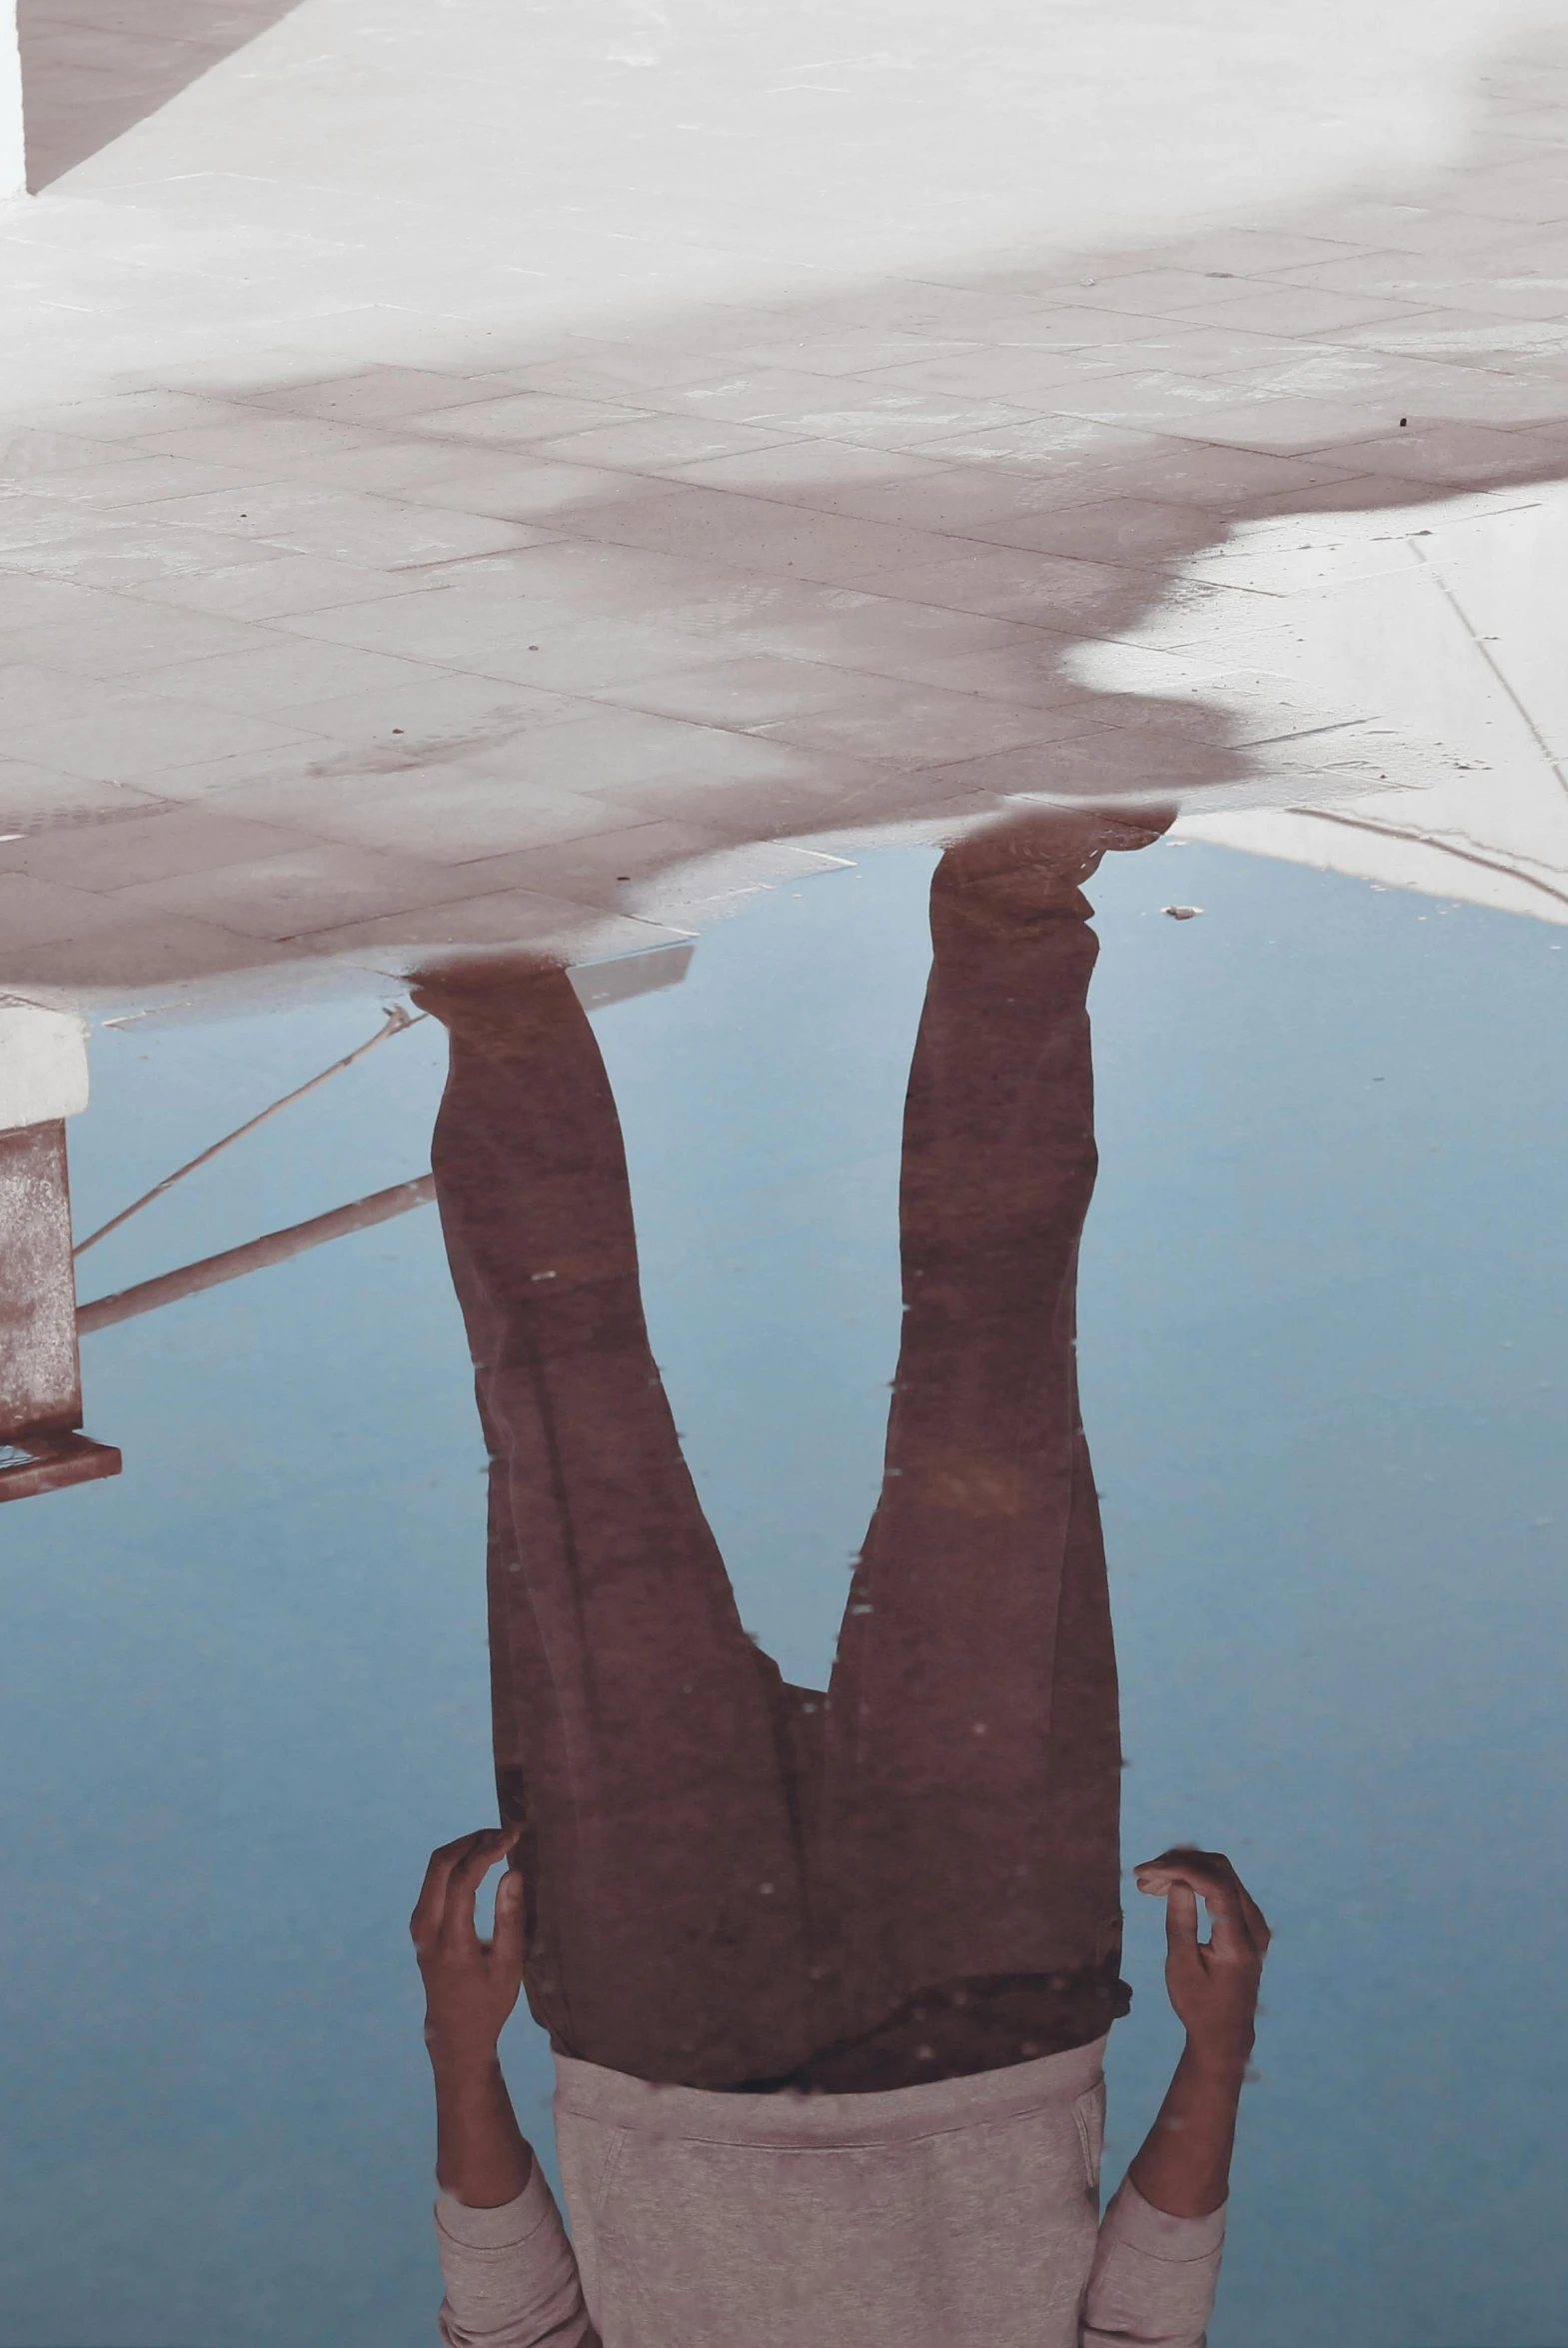 a reflection of a person upside down on the ground, inspired by Ren Hang, unsplash, conceptual art, standing on ship deck, drop shadow, inverted colors, taken in the late 2010s